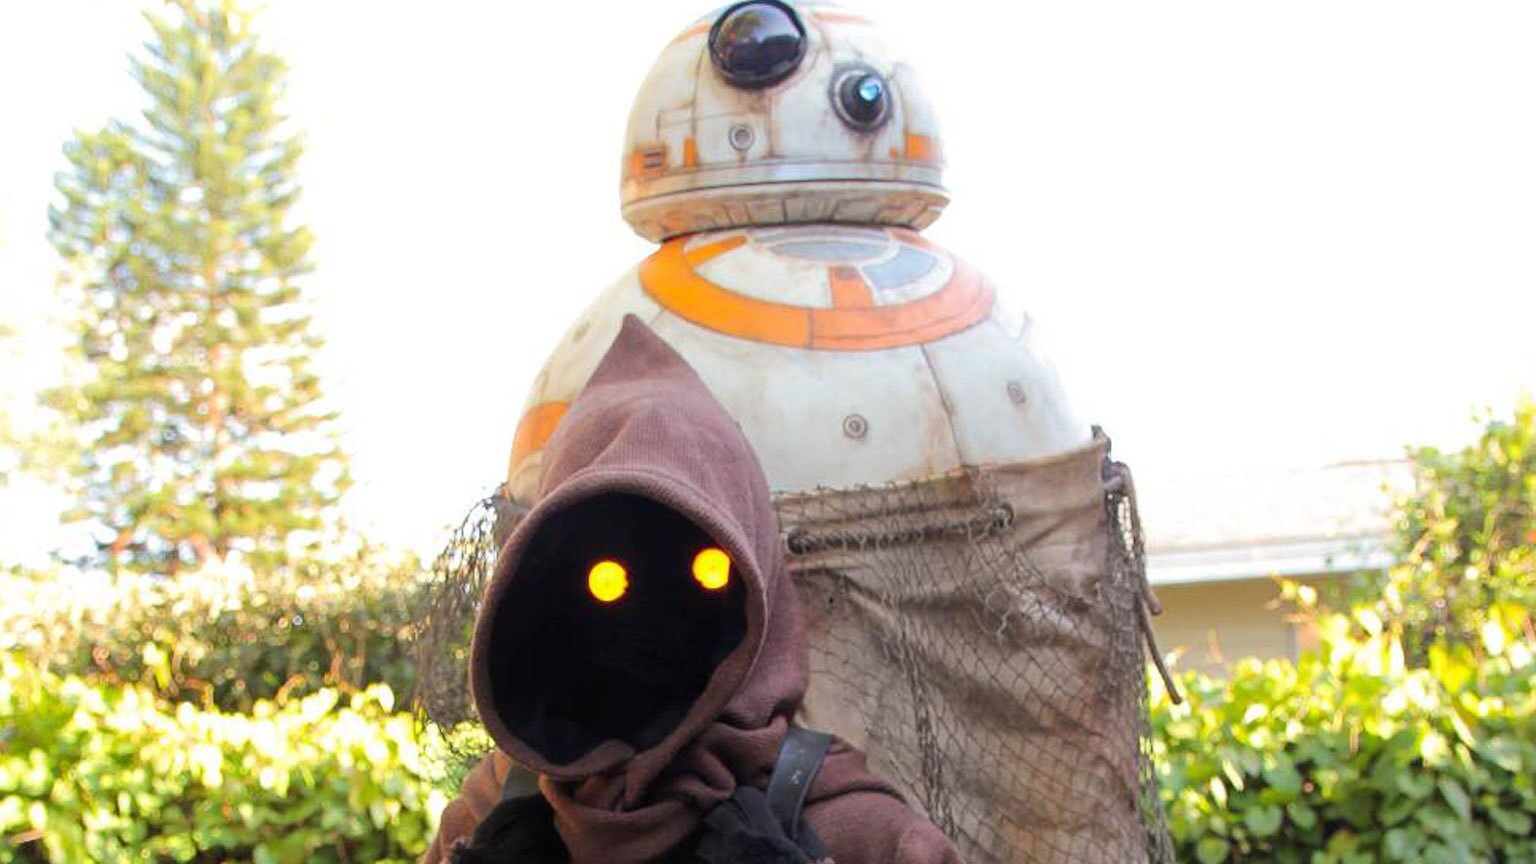 Fully Operational Fandom: A Jawa Meets BB-8 in This Brilliant Cosplay